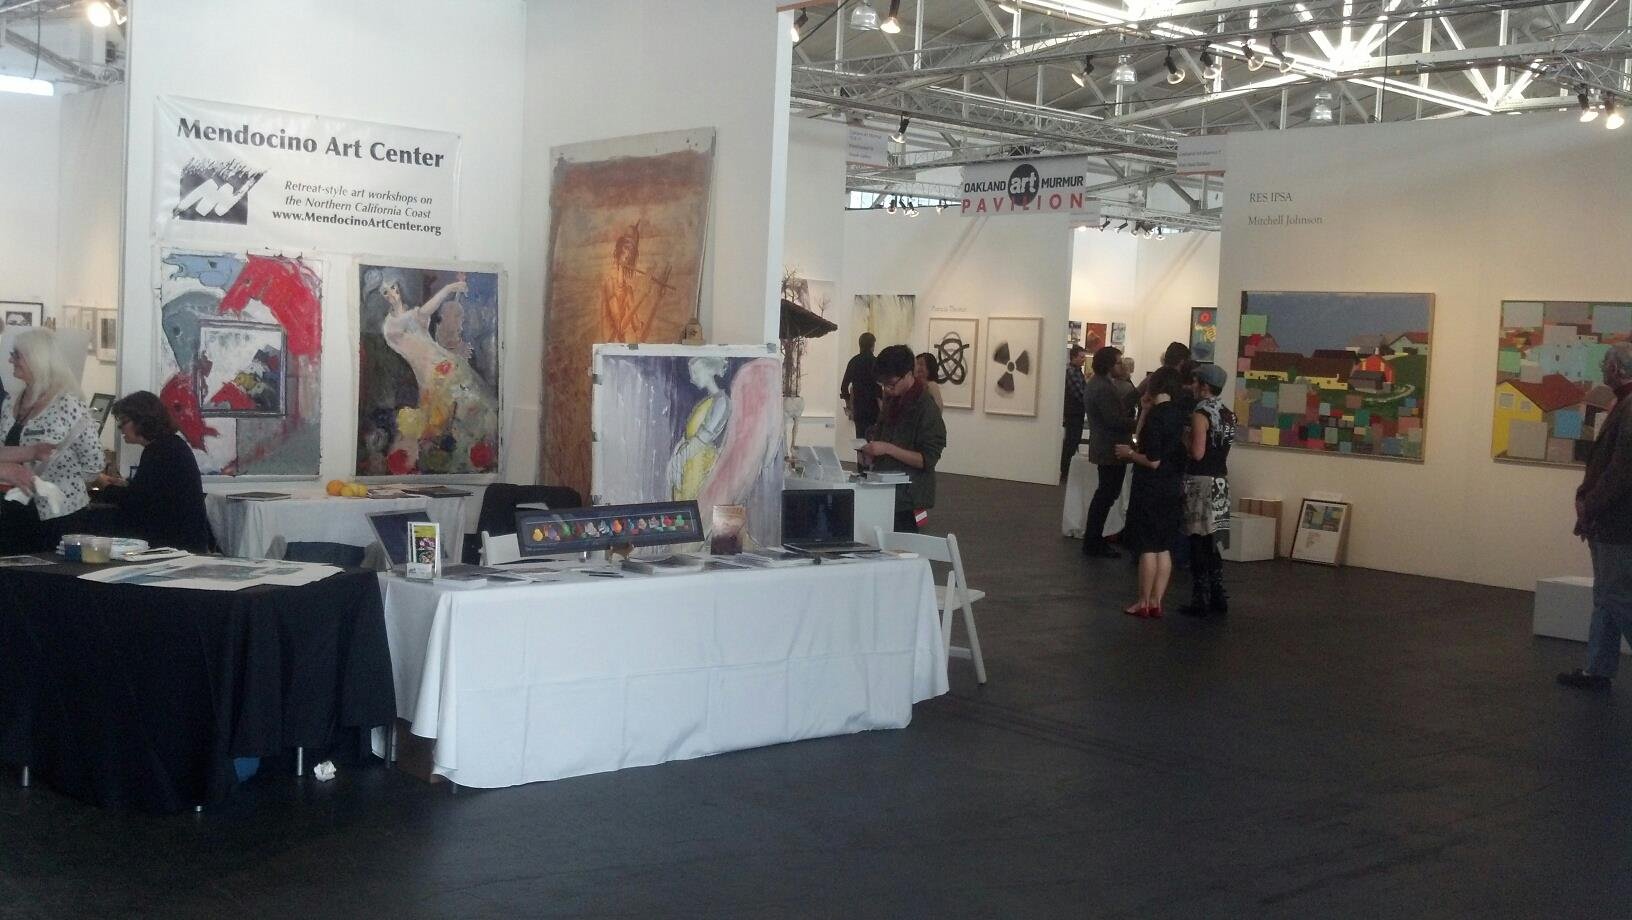 Exhibition and Demonstration with Mendocino Art Center, San Franciso Fine Art Fair